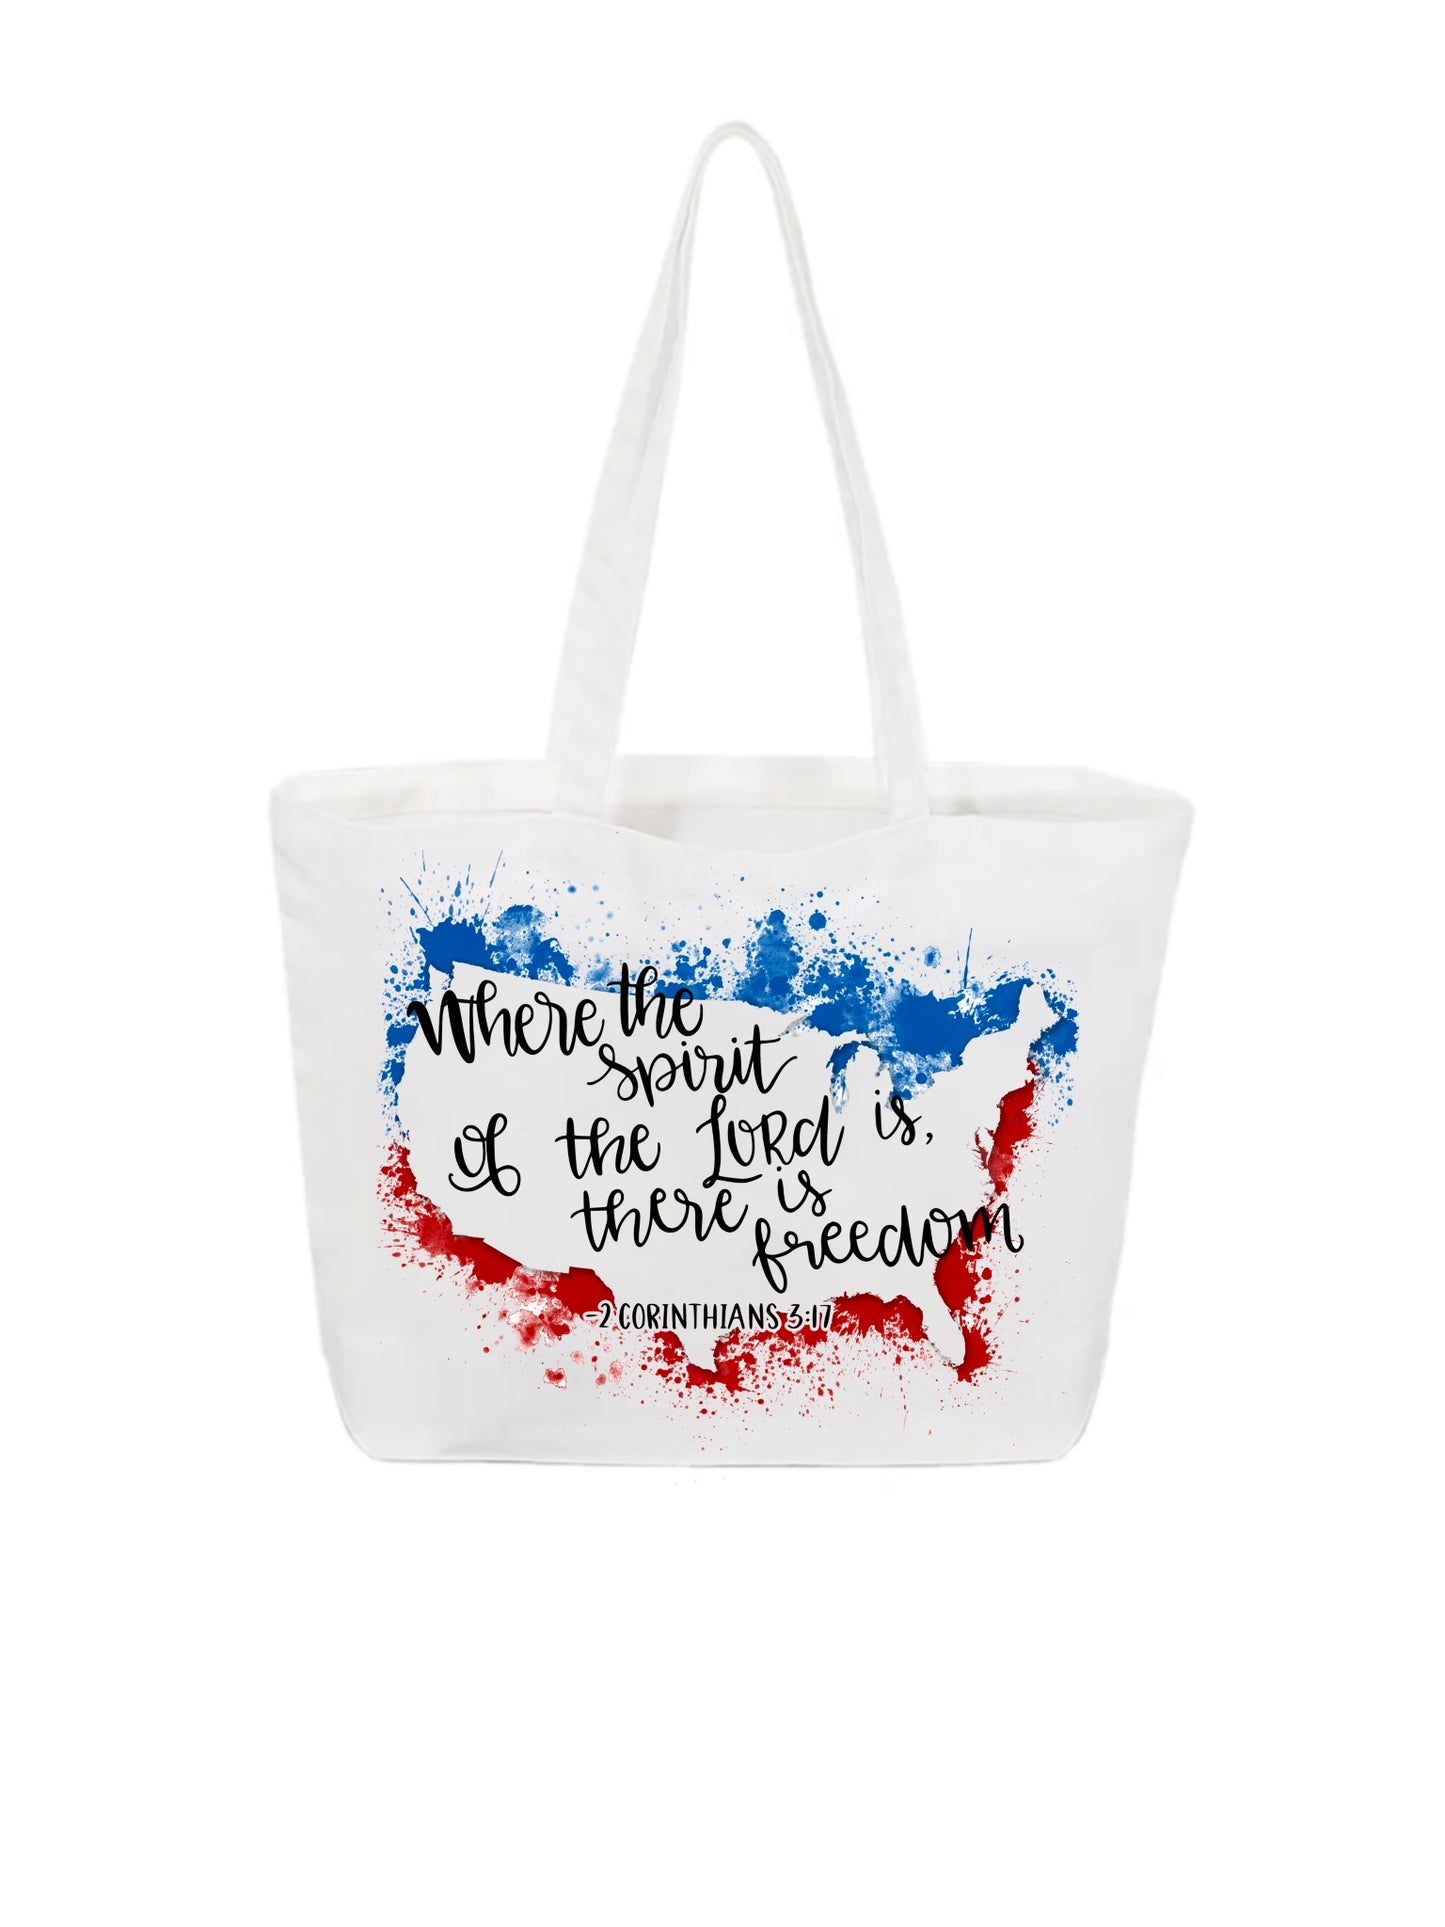 Spirit of the Lord tote bag